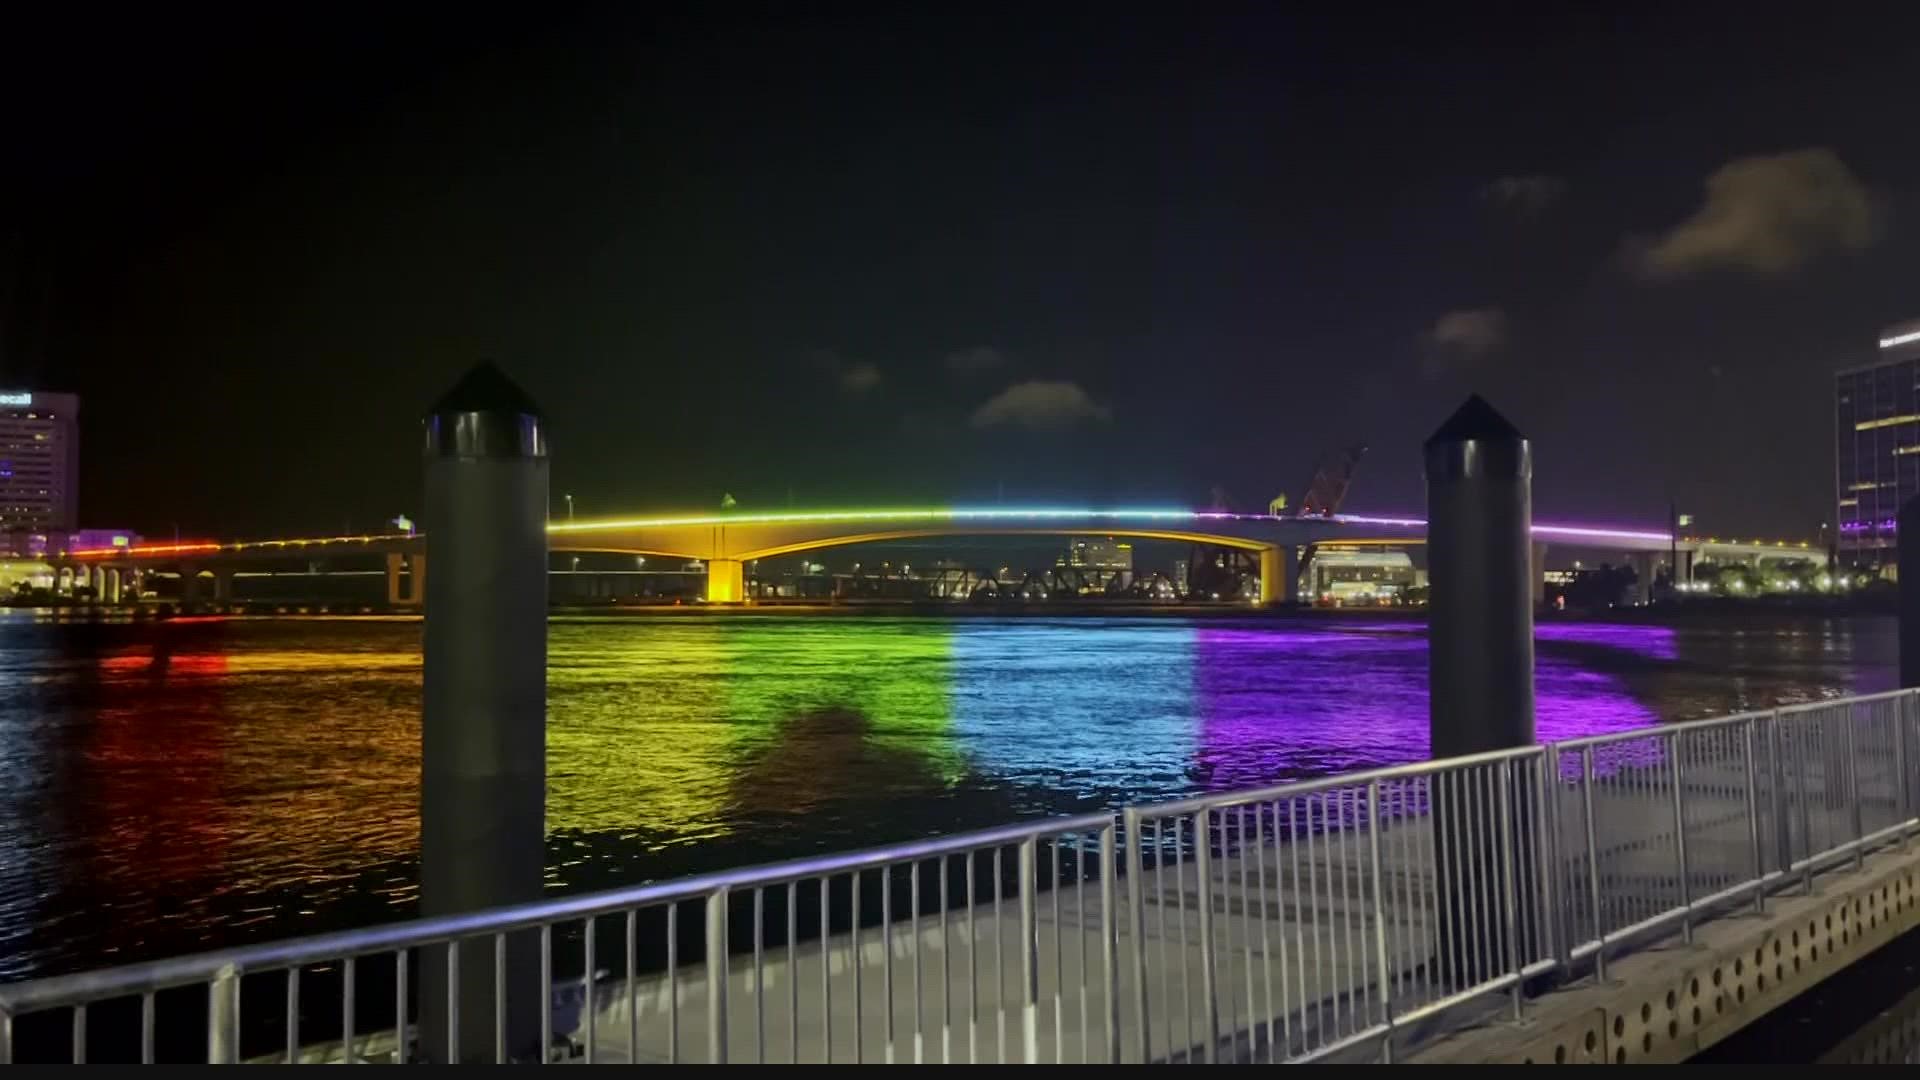 In 2021, the Florida Department of Transportation angered the LGBTQ+ community when they ordered Pride lights off. This year, JTA says there shouldn't be a problem.